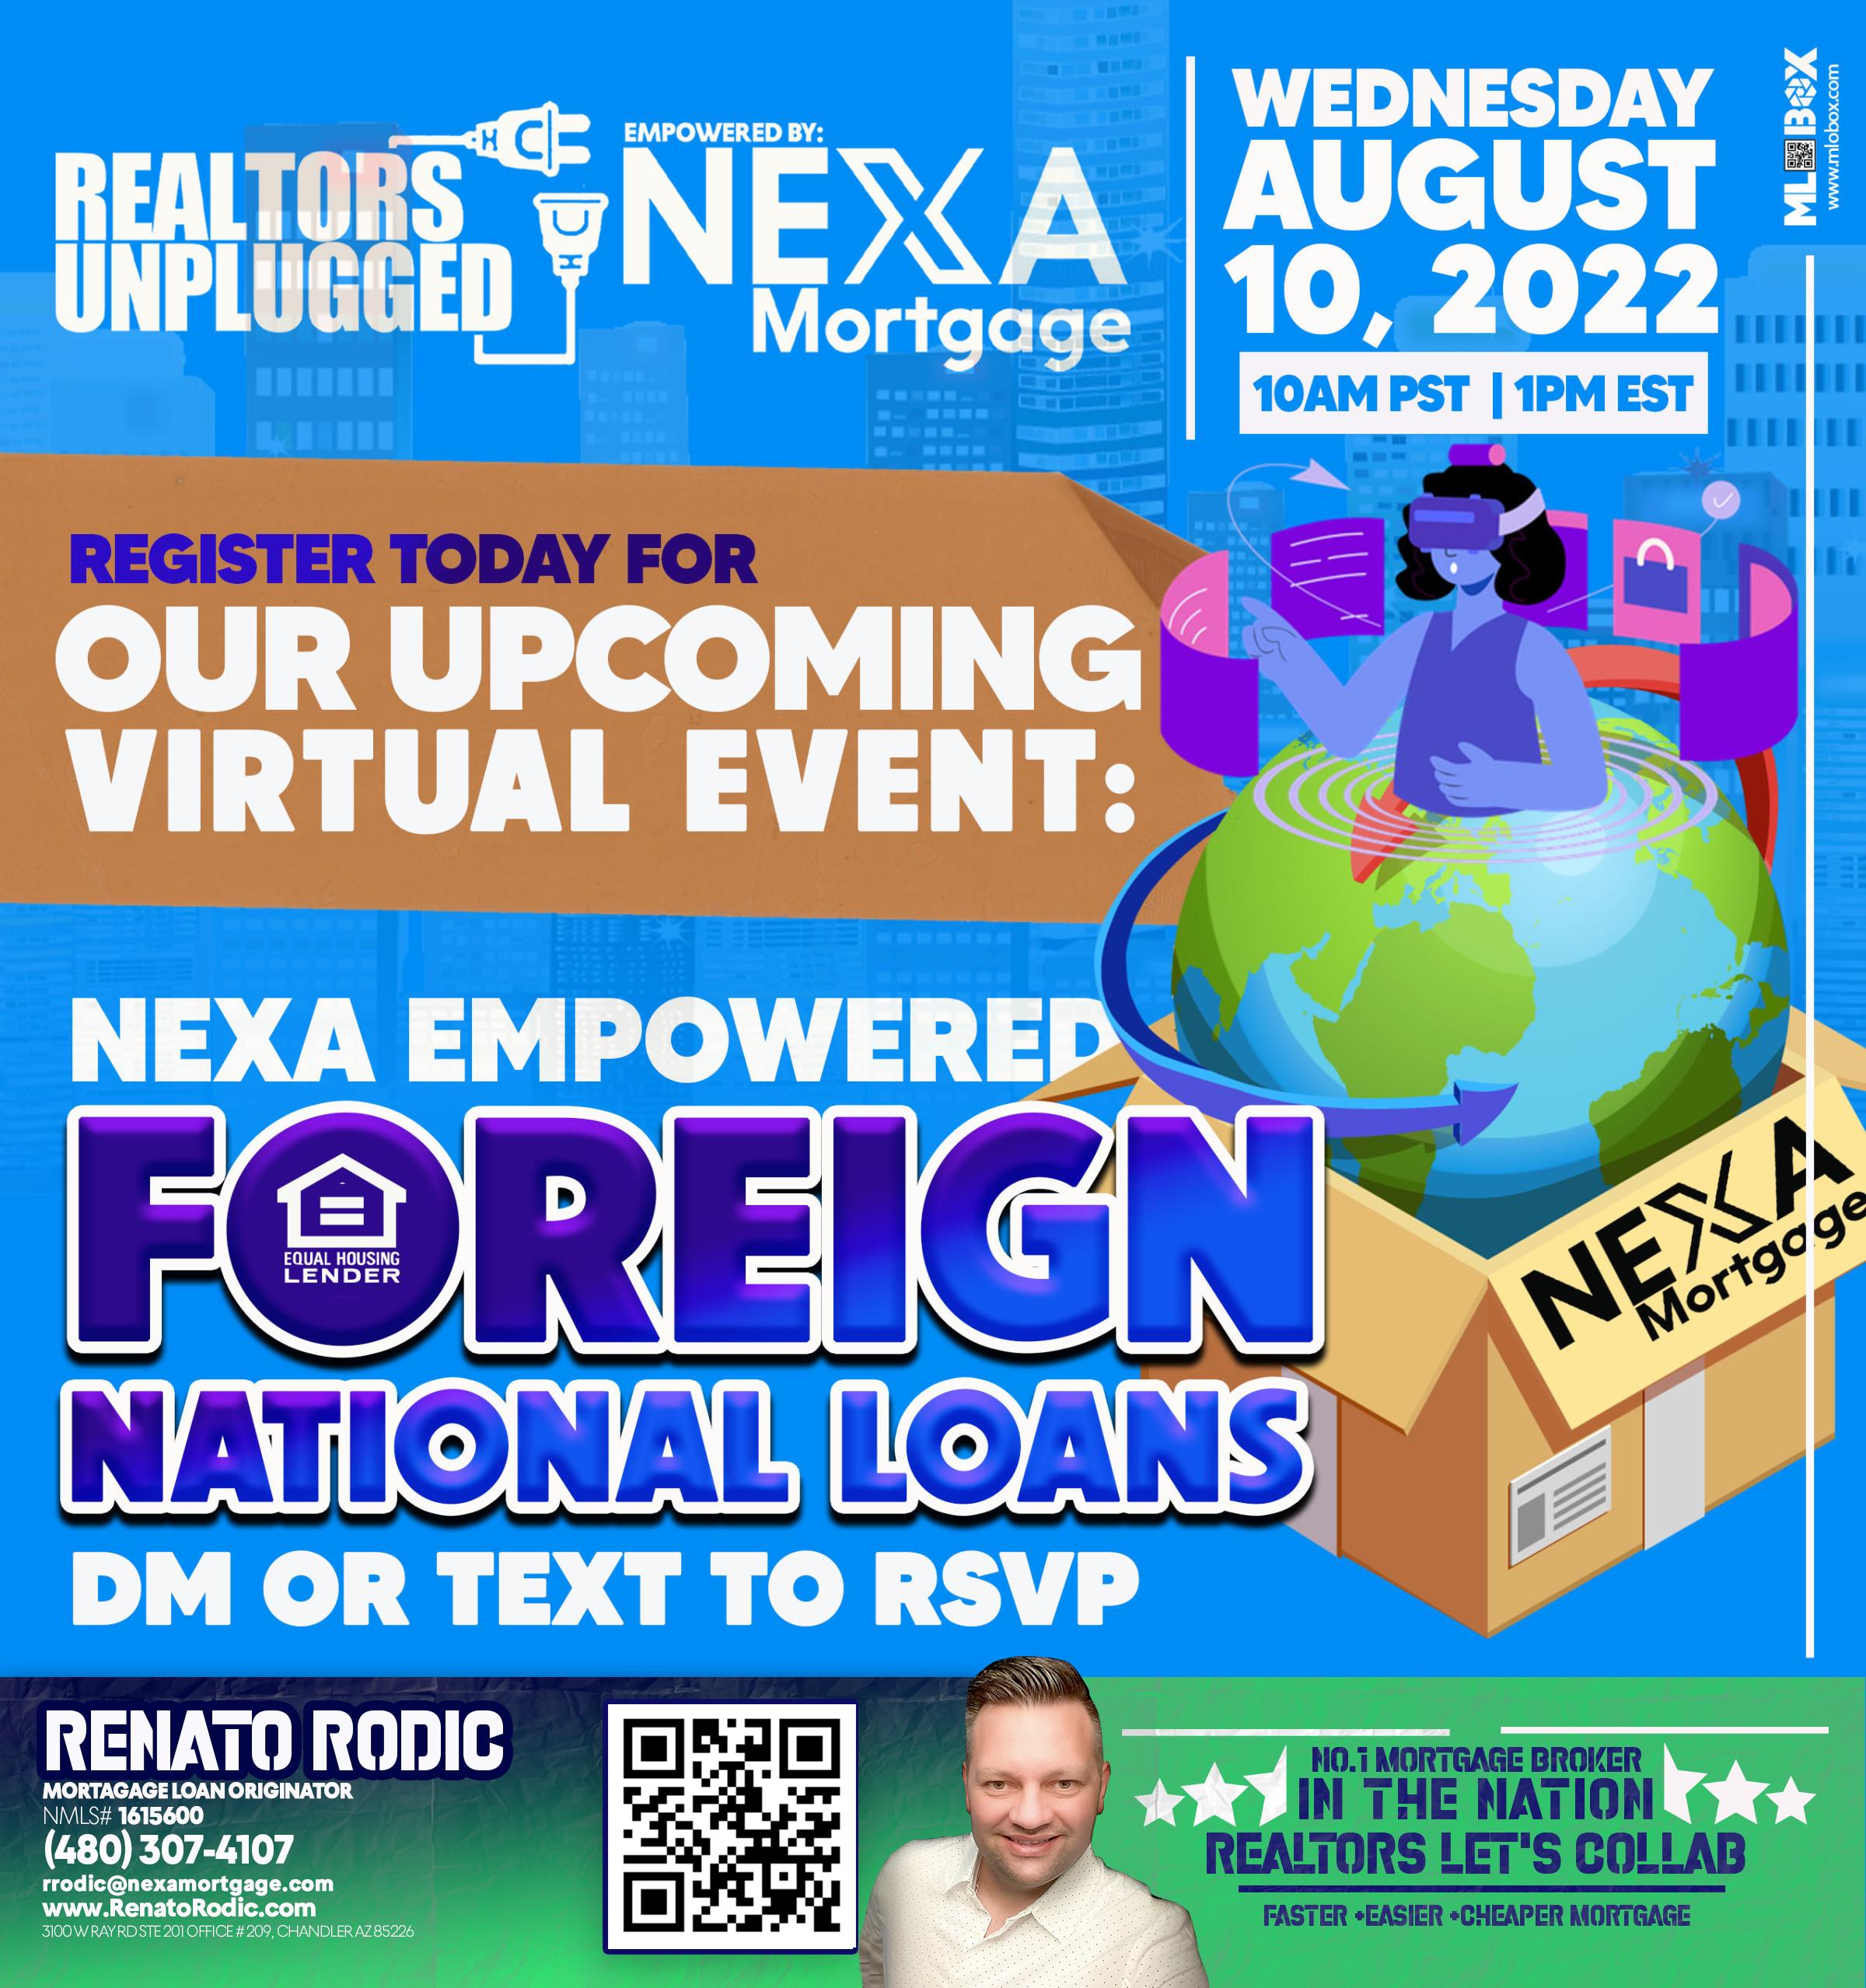 FOREIGN NATIONAL LOANS  BY NEXA REALTORS UNPLUGGED